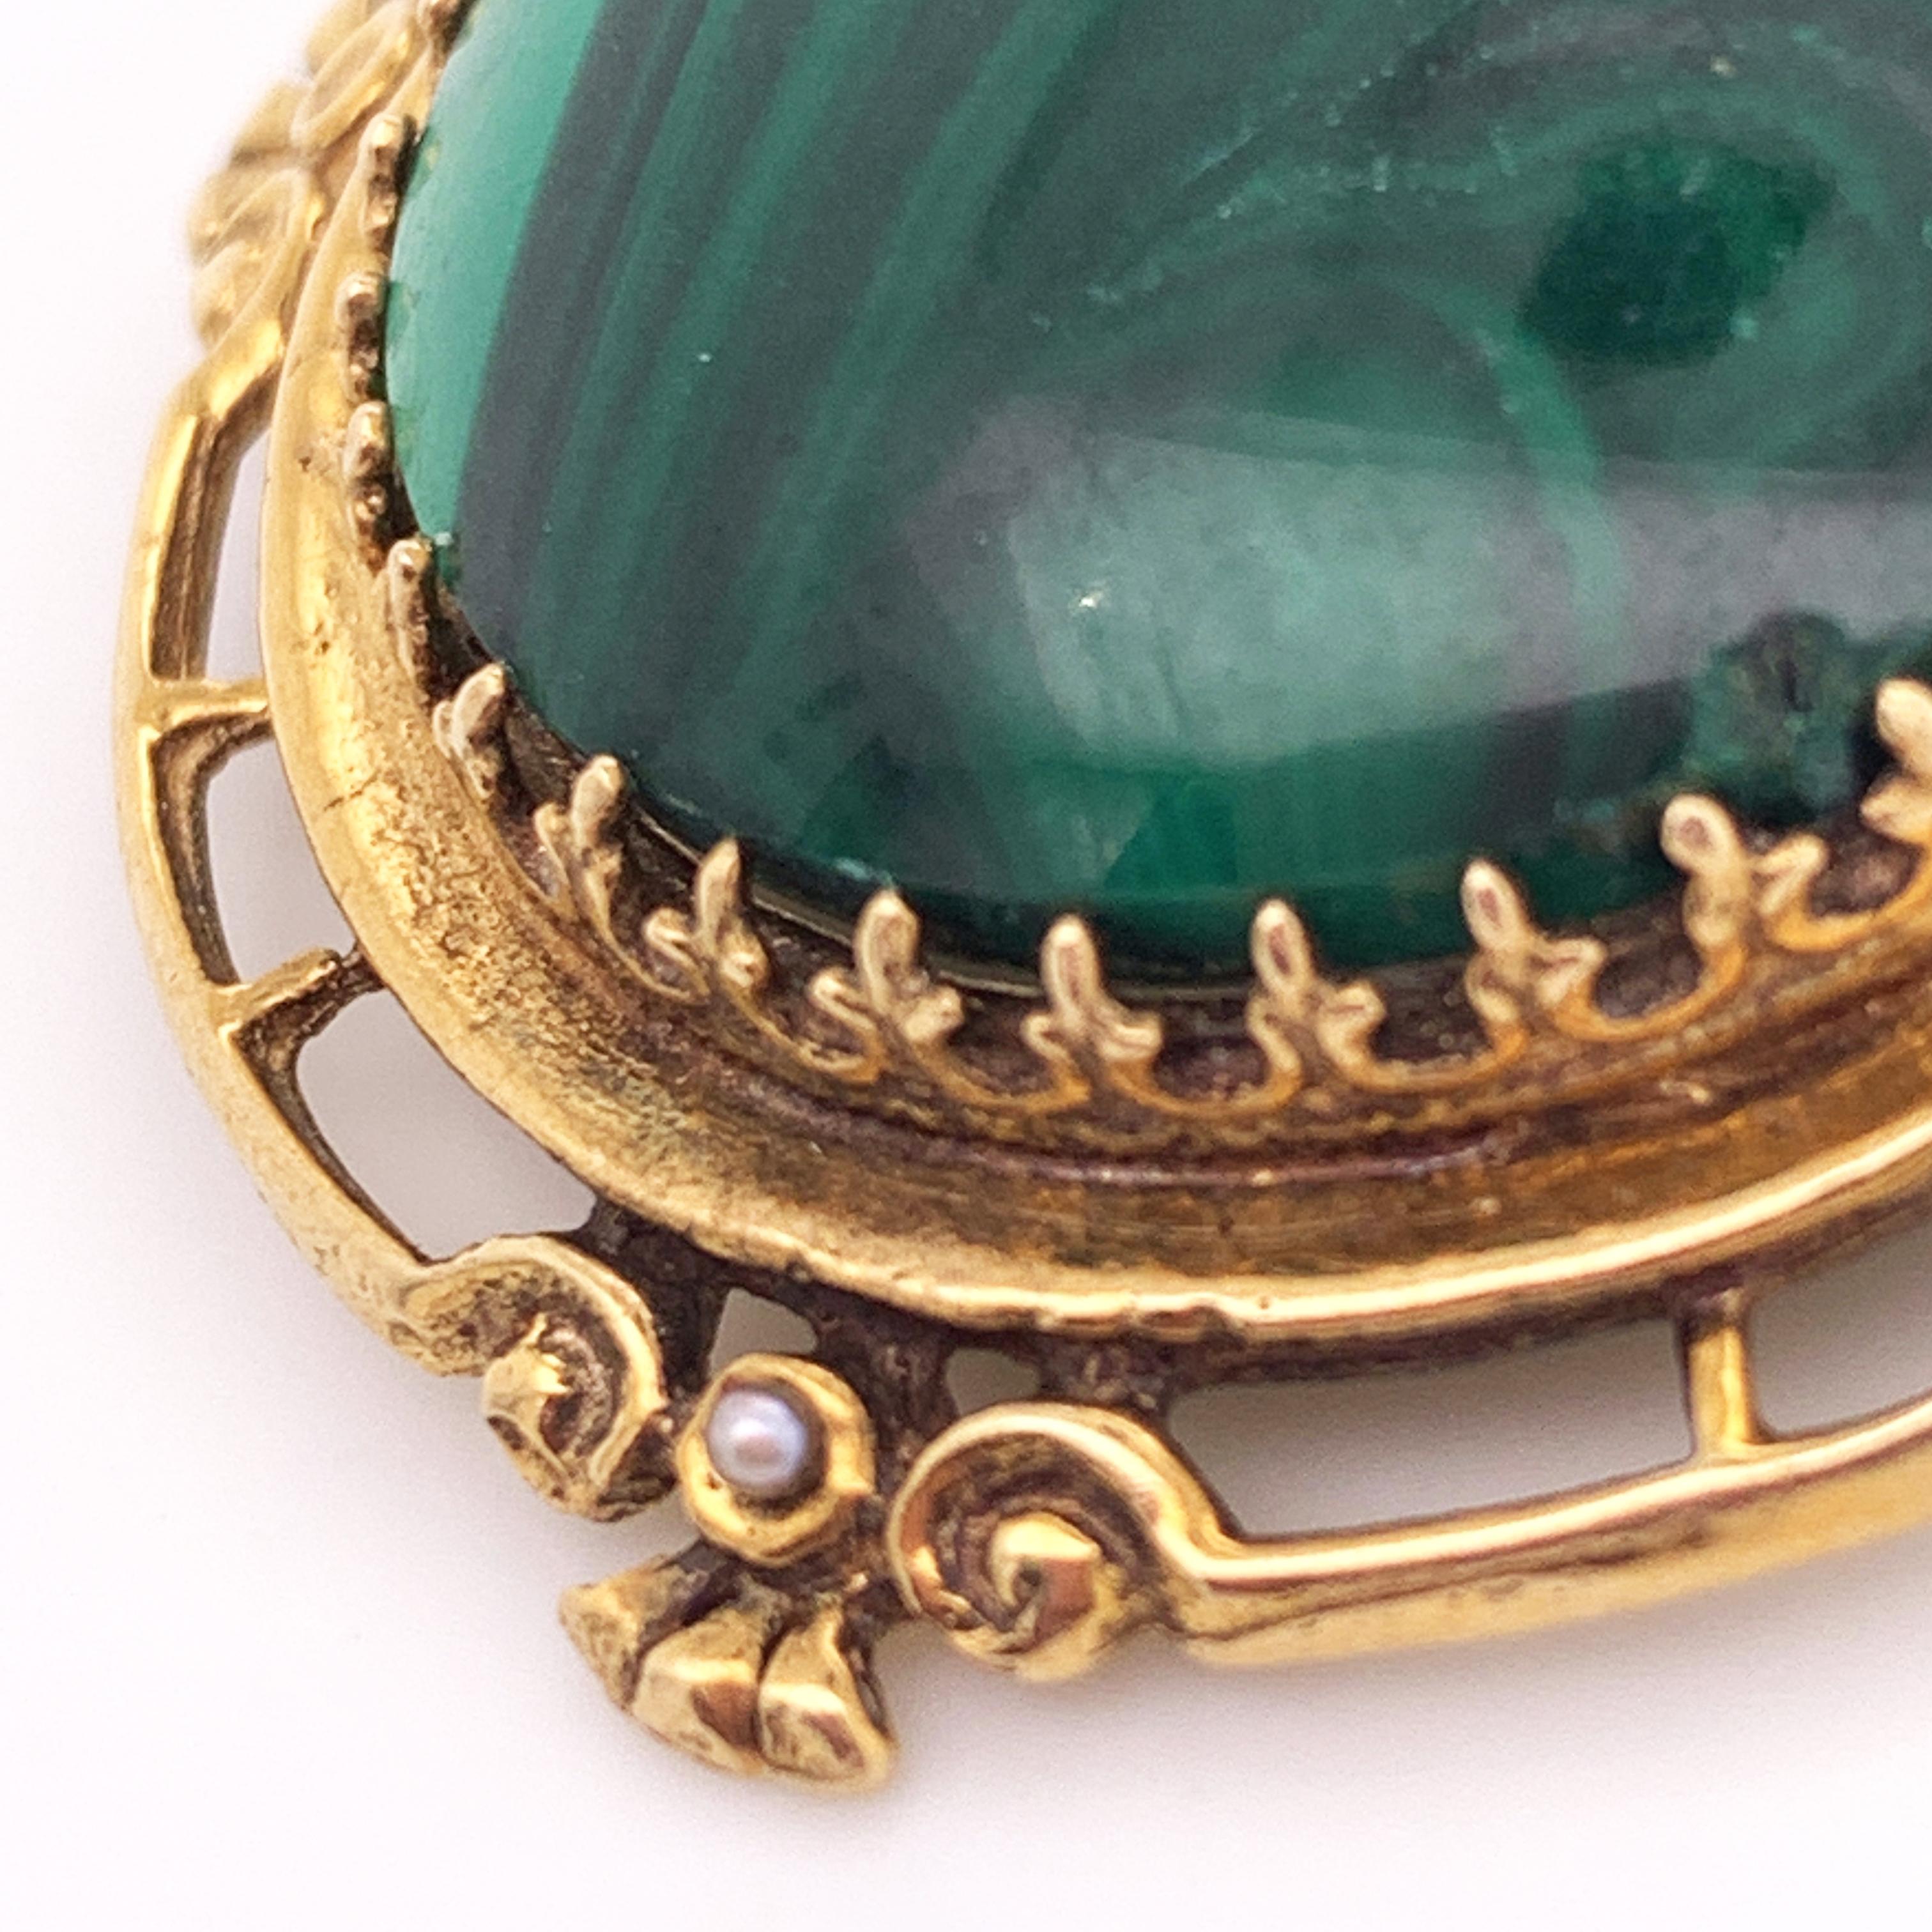 Baroque Natural Malachite Stone Brooch Framed in 14 Karat Yellow Gold With Accent Pearls